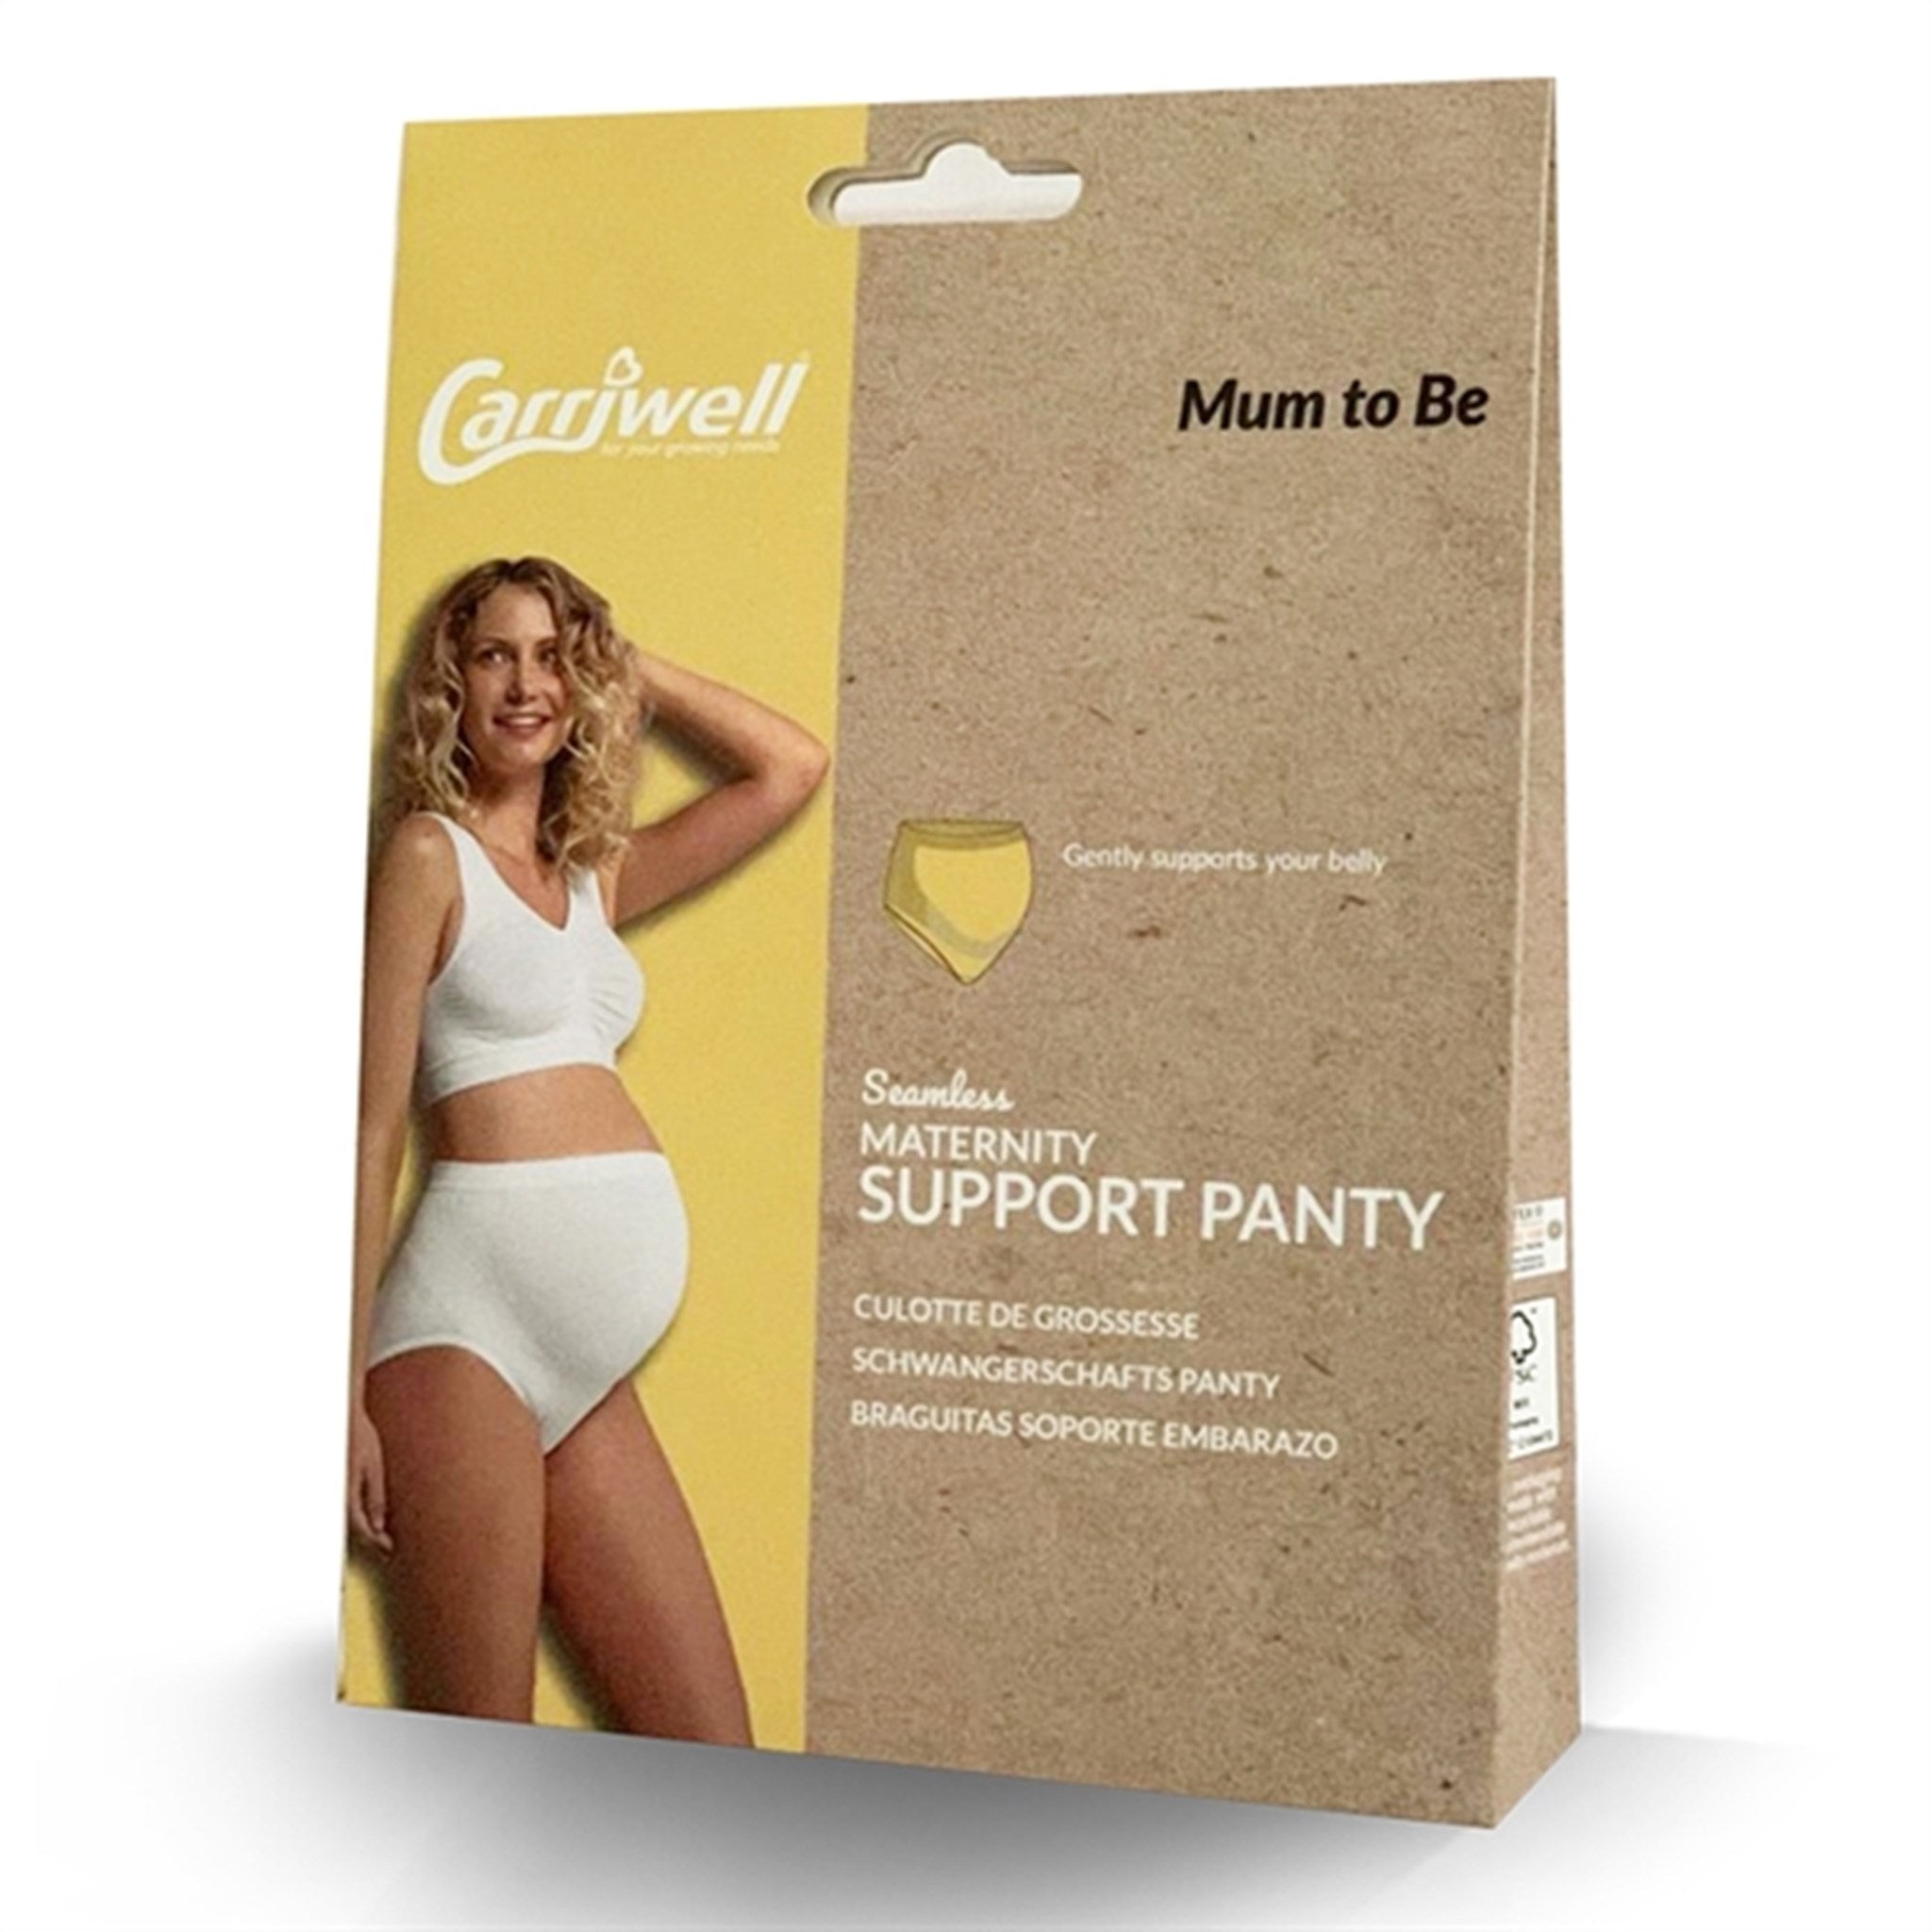 Carriwell Maternity Support Panty White 6